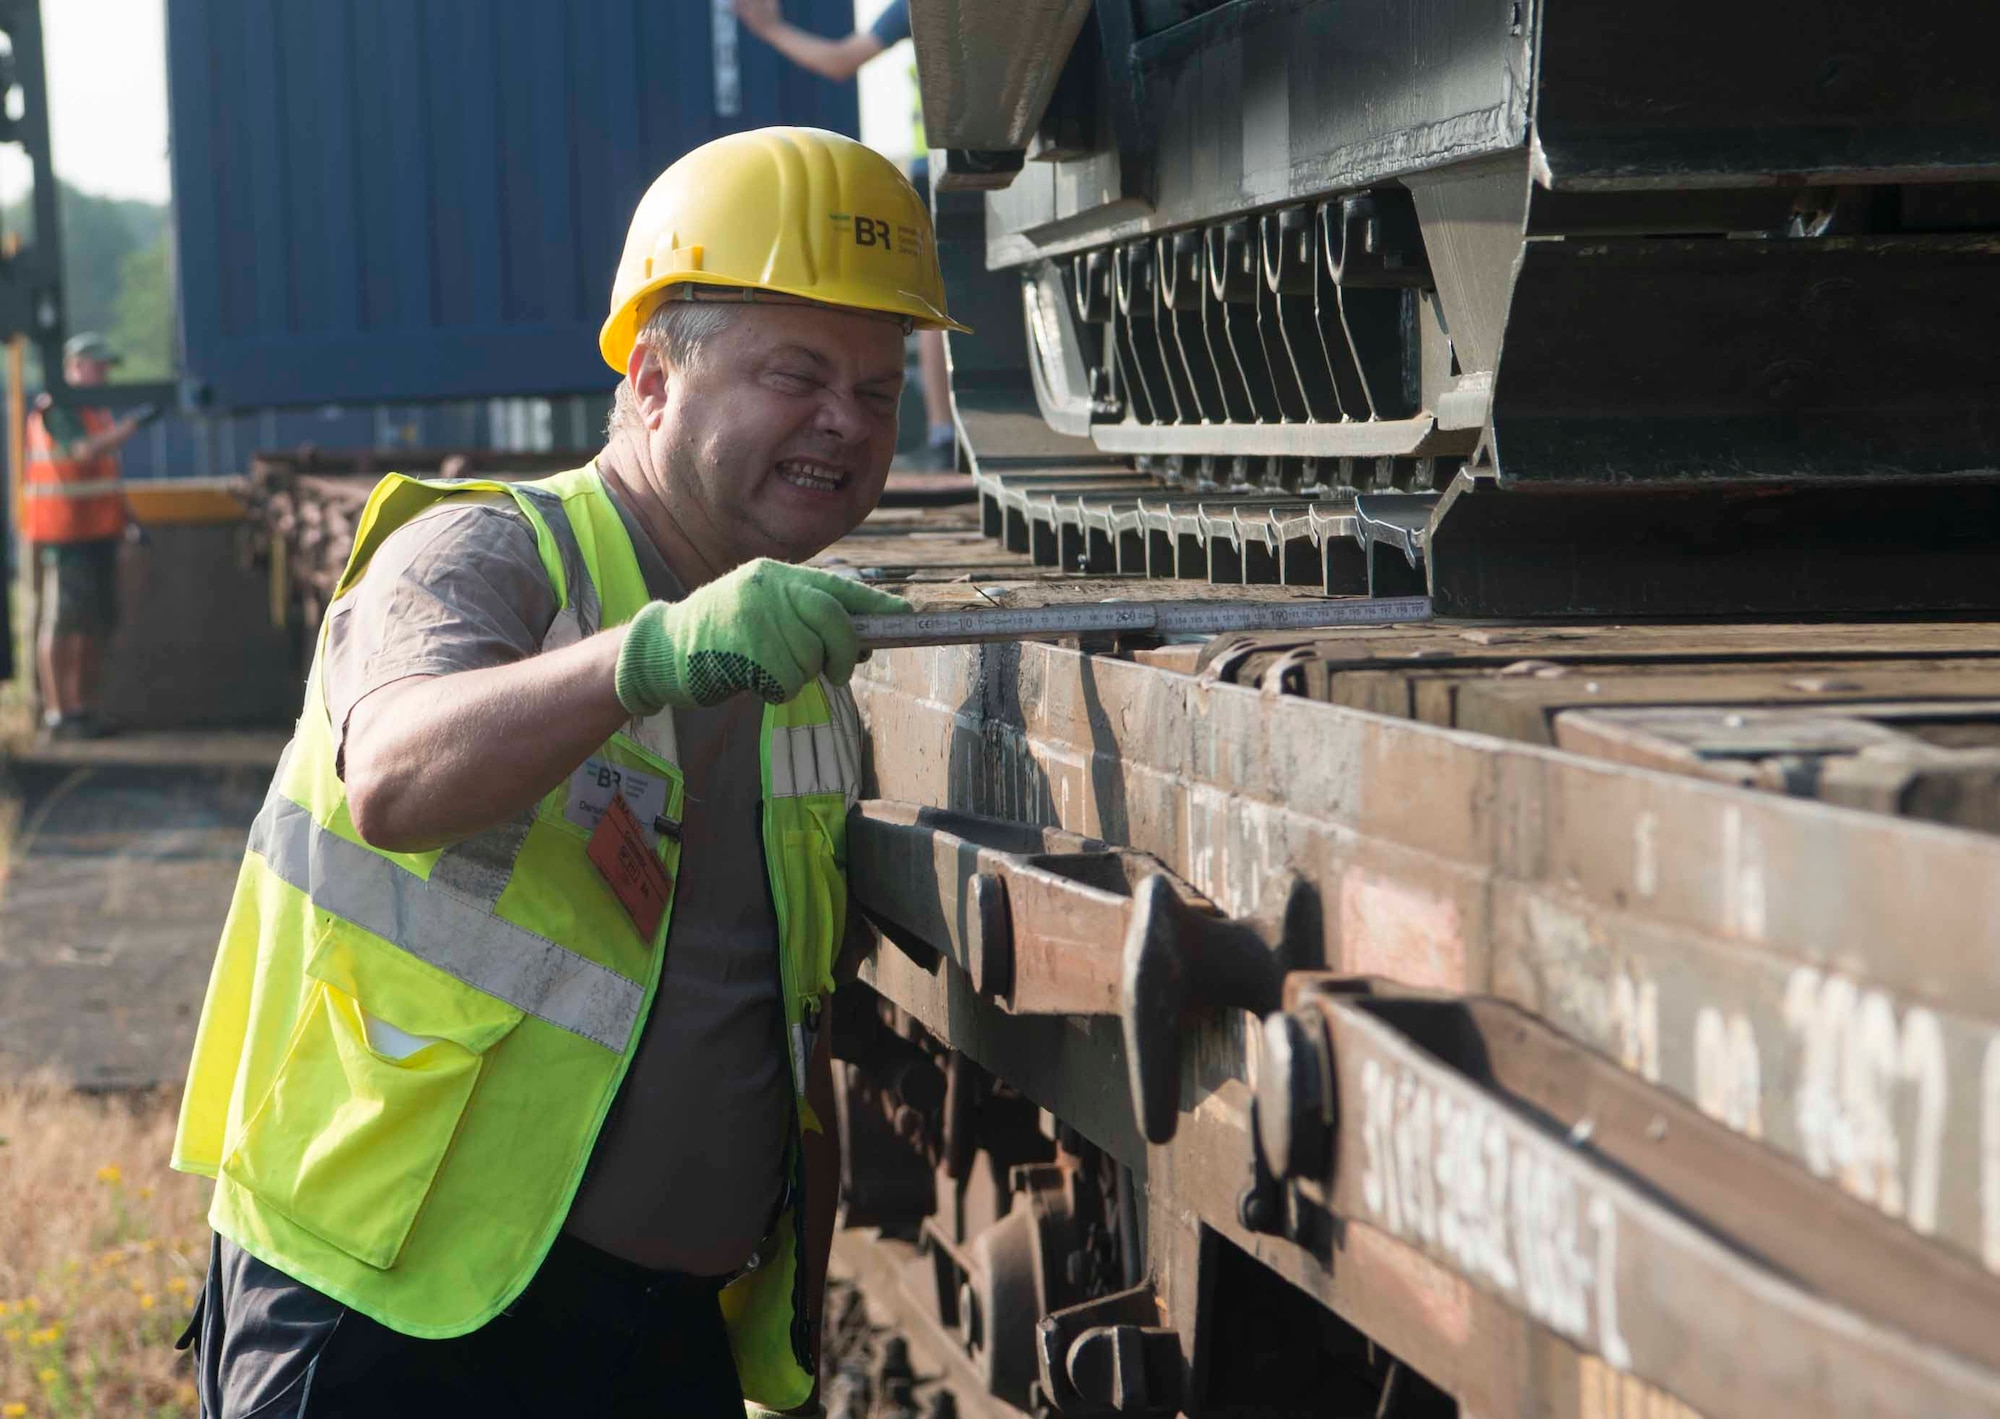 A BR International Consulting Services blocking and bracing specialist measures the space between a front loader and the edge of a train car in Sanem, Luxembourg, July 23, 2018. BR-ICS and Warehouse Services Agency personnel ensured that a variety of vehicles and equipment were properly loaded and secured on train cars bound for Krzesiny Air Base, Poland. (U.S. Air Force photo by Senior Airman Elizabeth Baker)